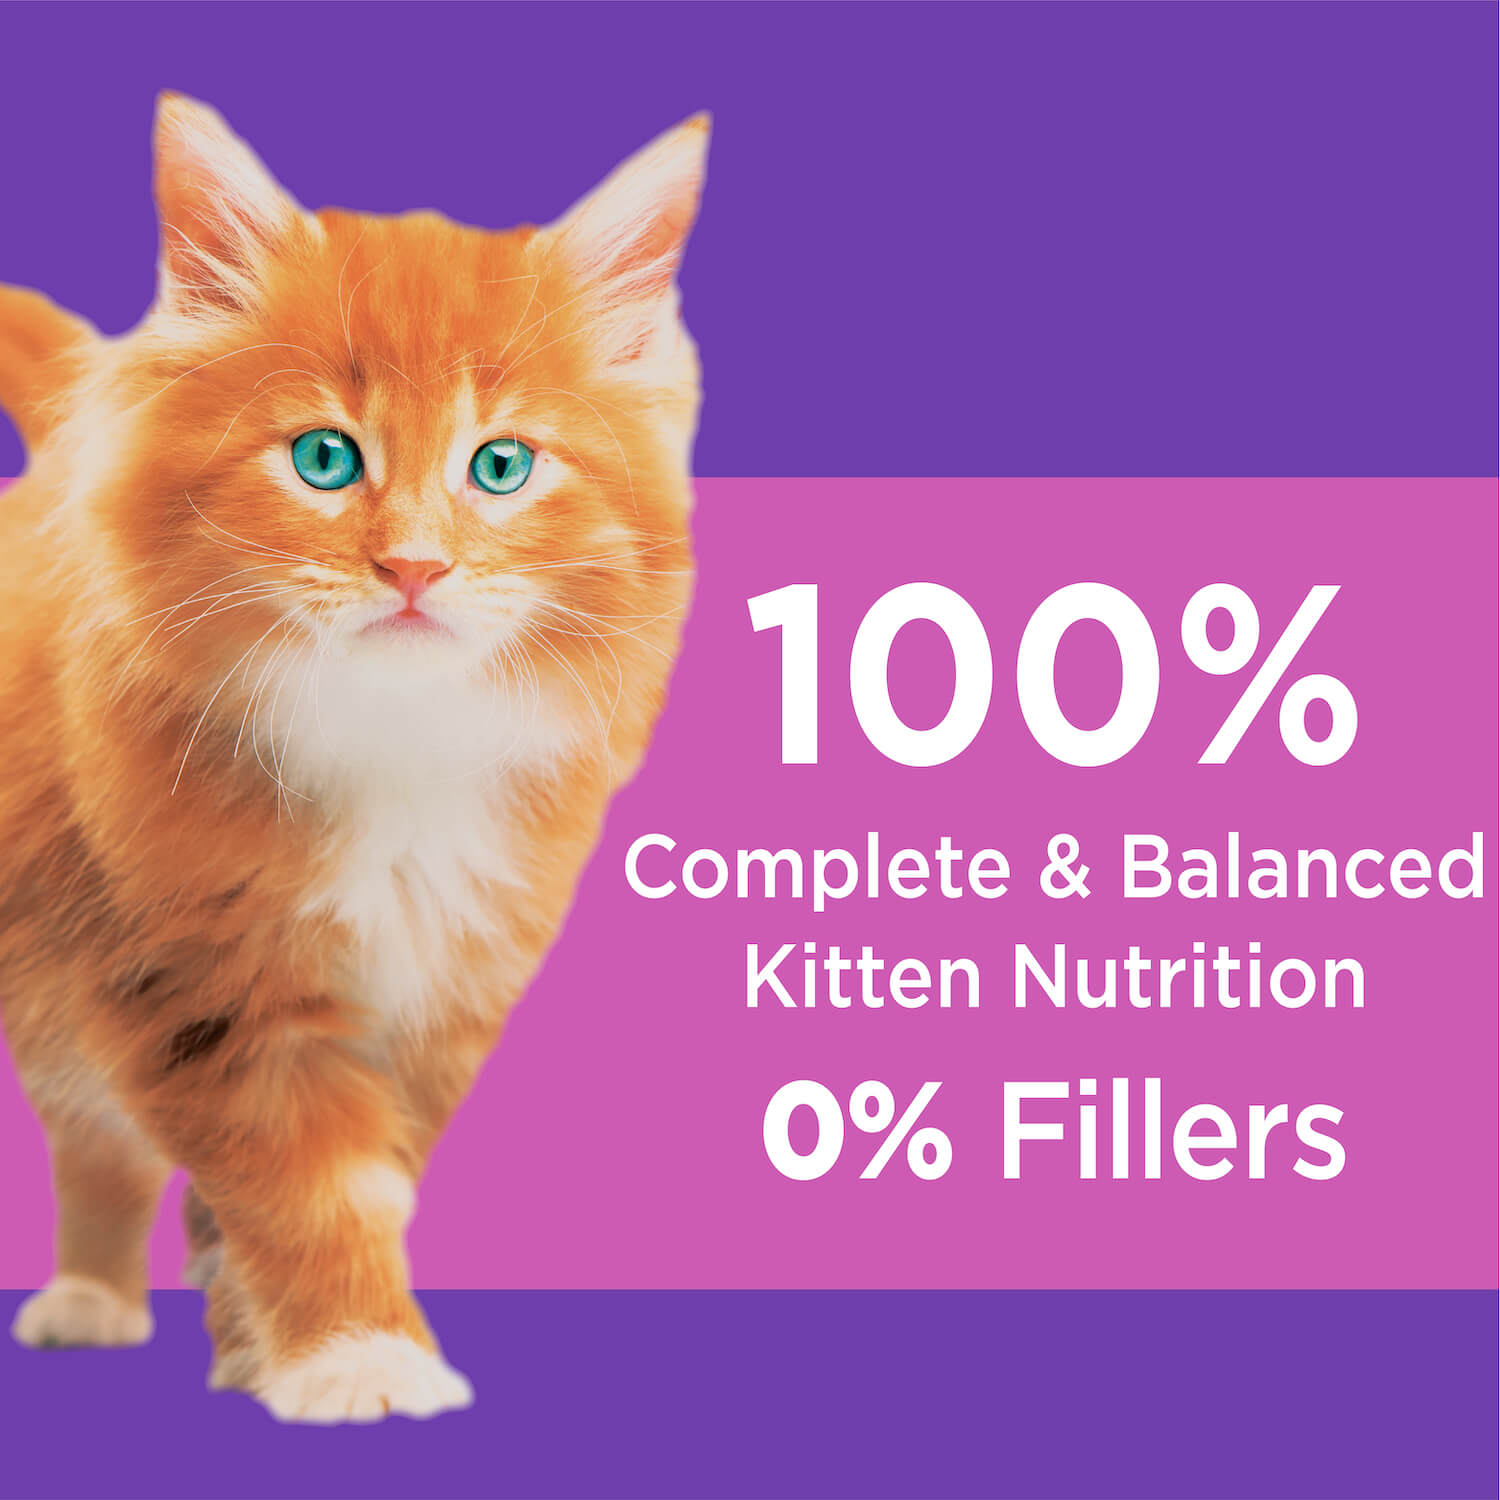 IAMS Healthy Kitten Dry Cat Food with Chicken